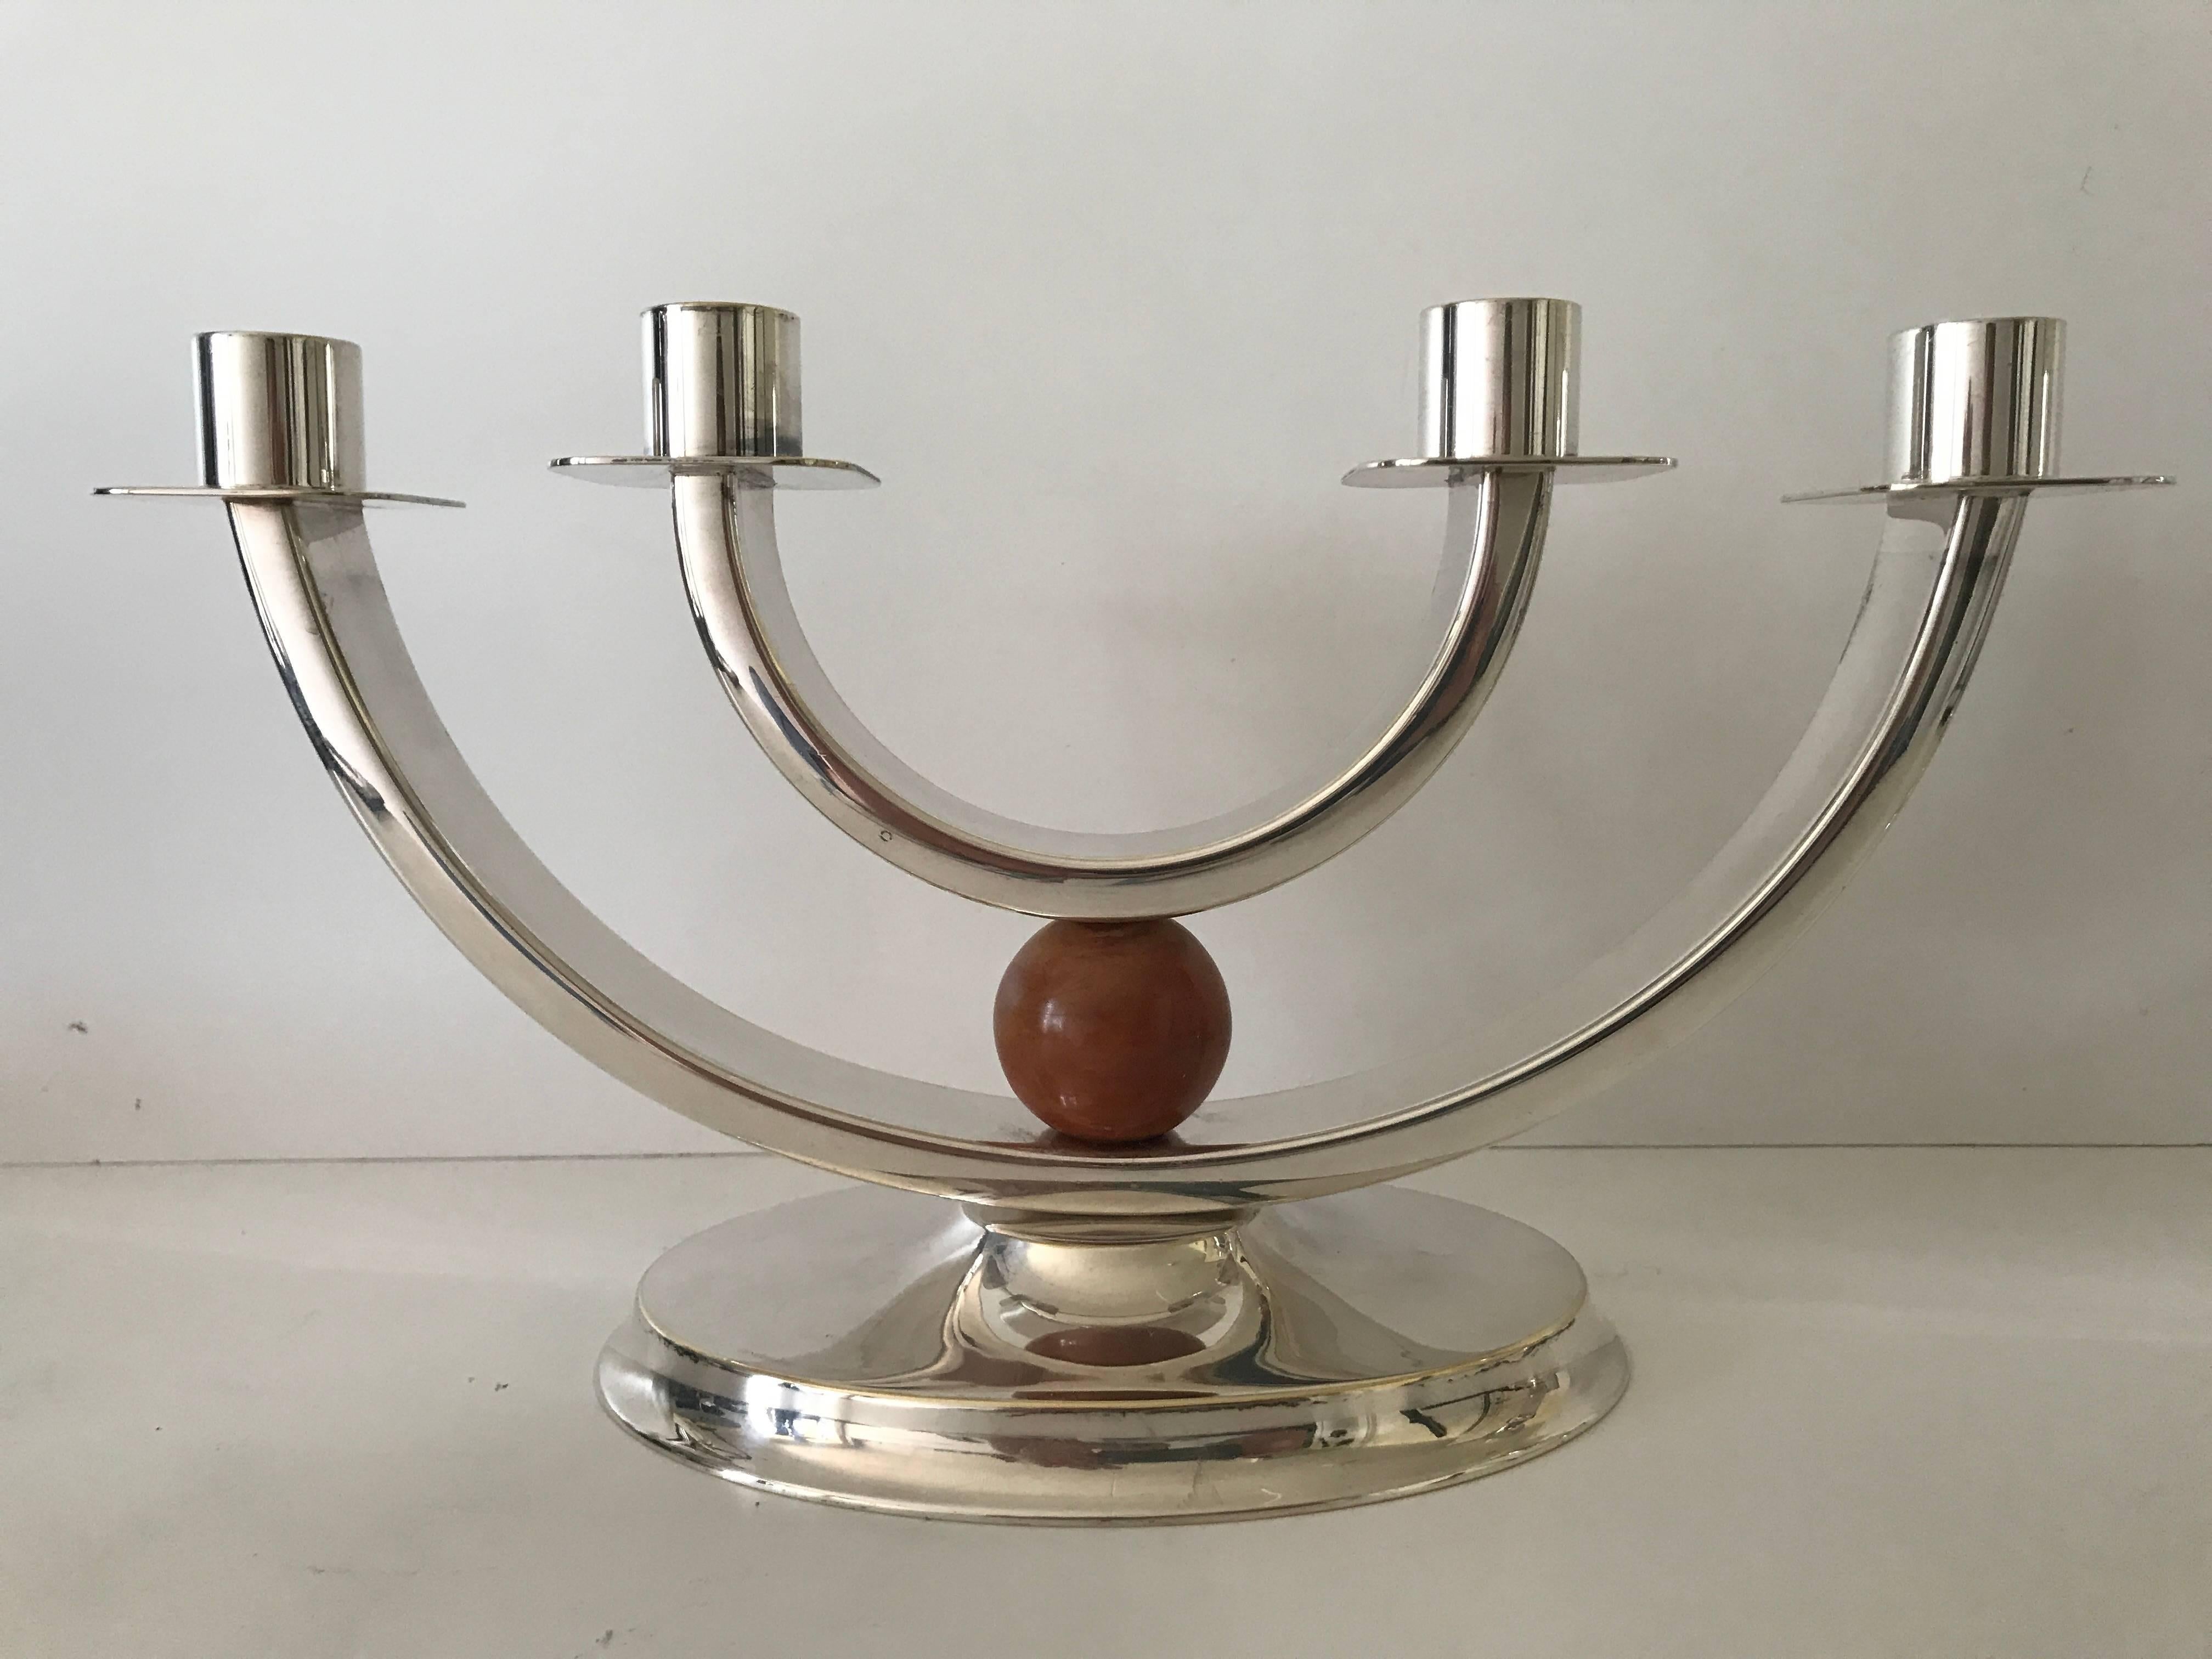 1930 Art Deco German bakelite silver plate candelabra F. W. Quist Württemberg.
This is a very rare pair of silver plate and bakelite candelabra made by F. W. Quist in Württemberg. After long research on the internet this pair is the only that we